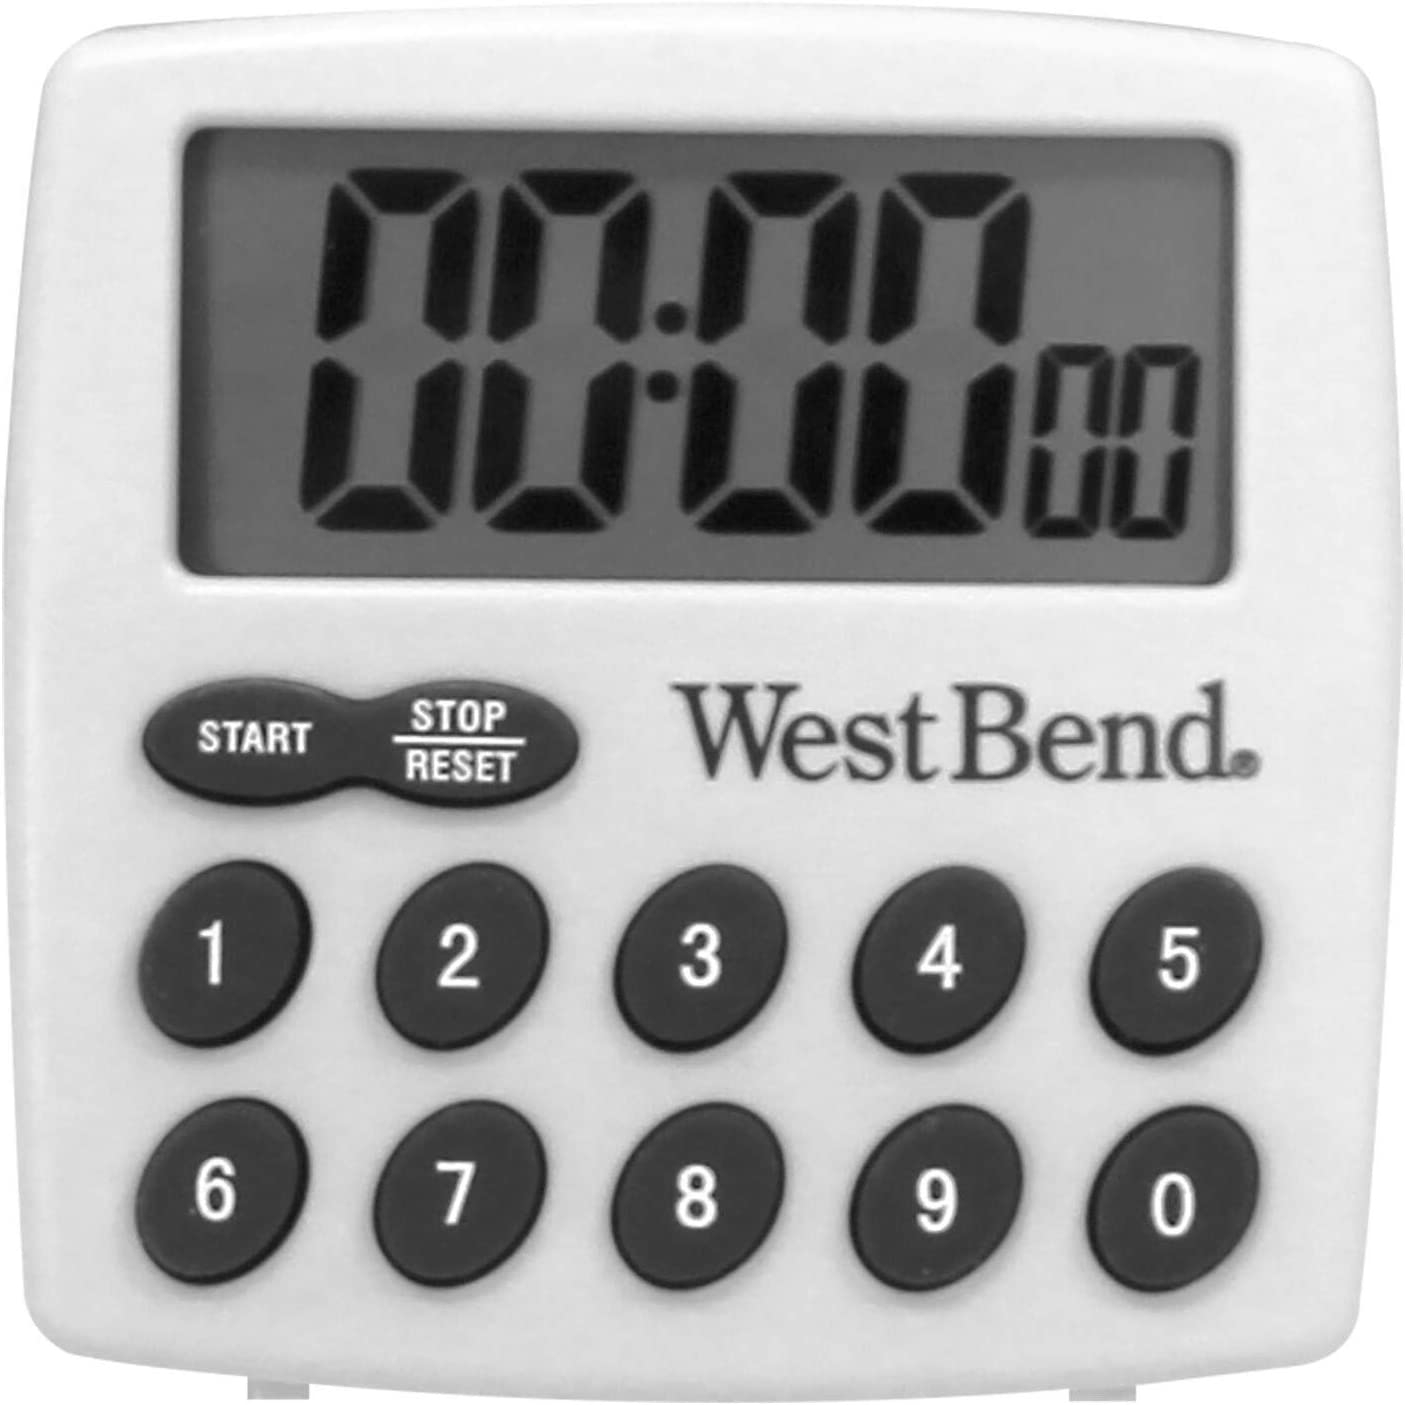 West Bend Easy to Read Digital Magnetic Kitchen Timer Features Large Display and Electronic Alarm, White Import To Shop